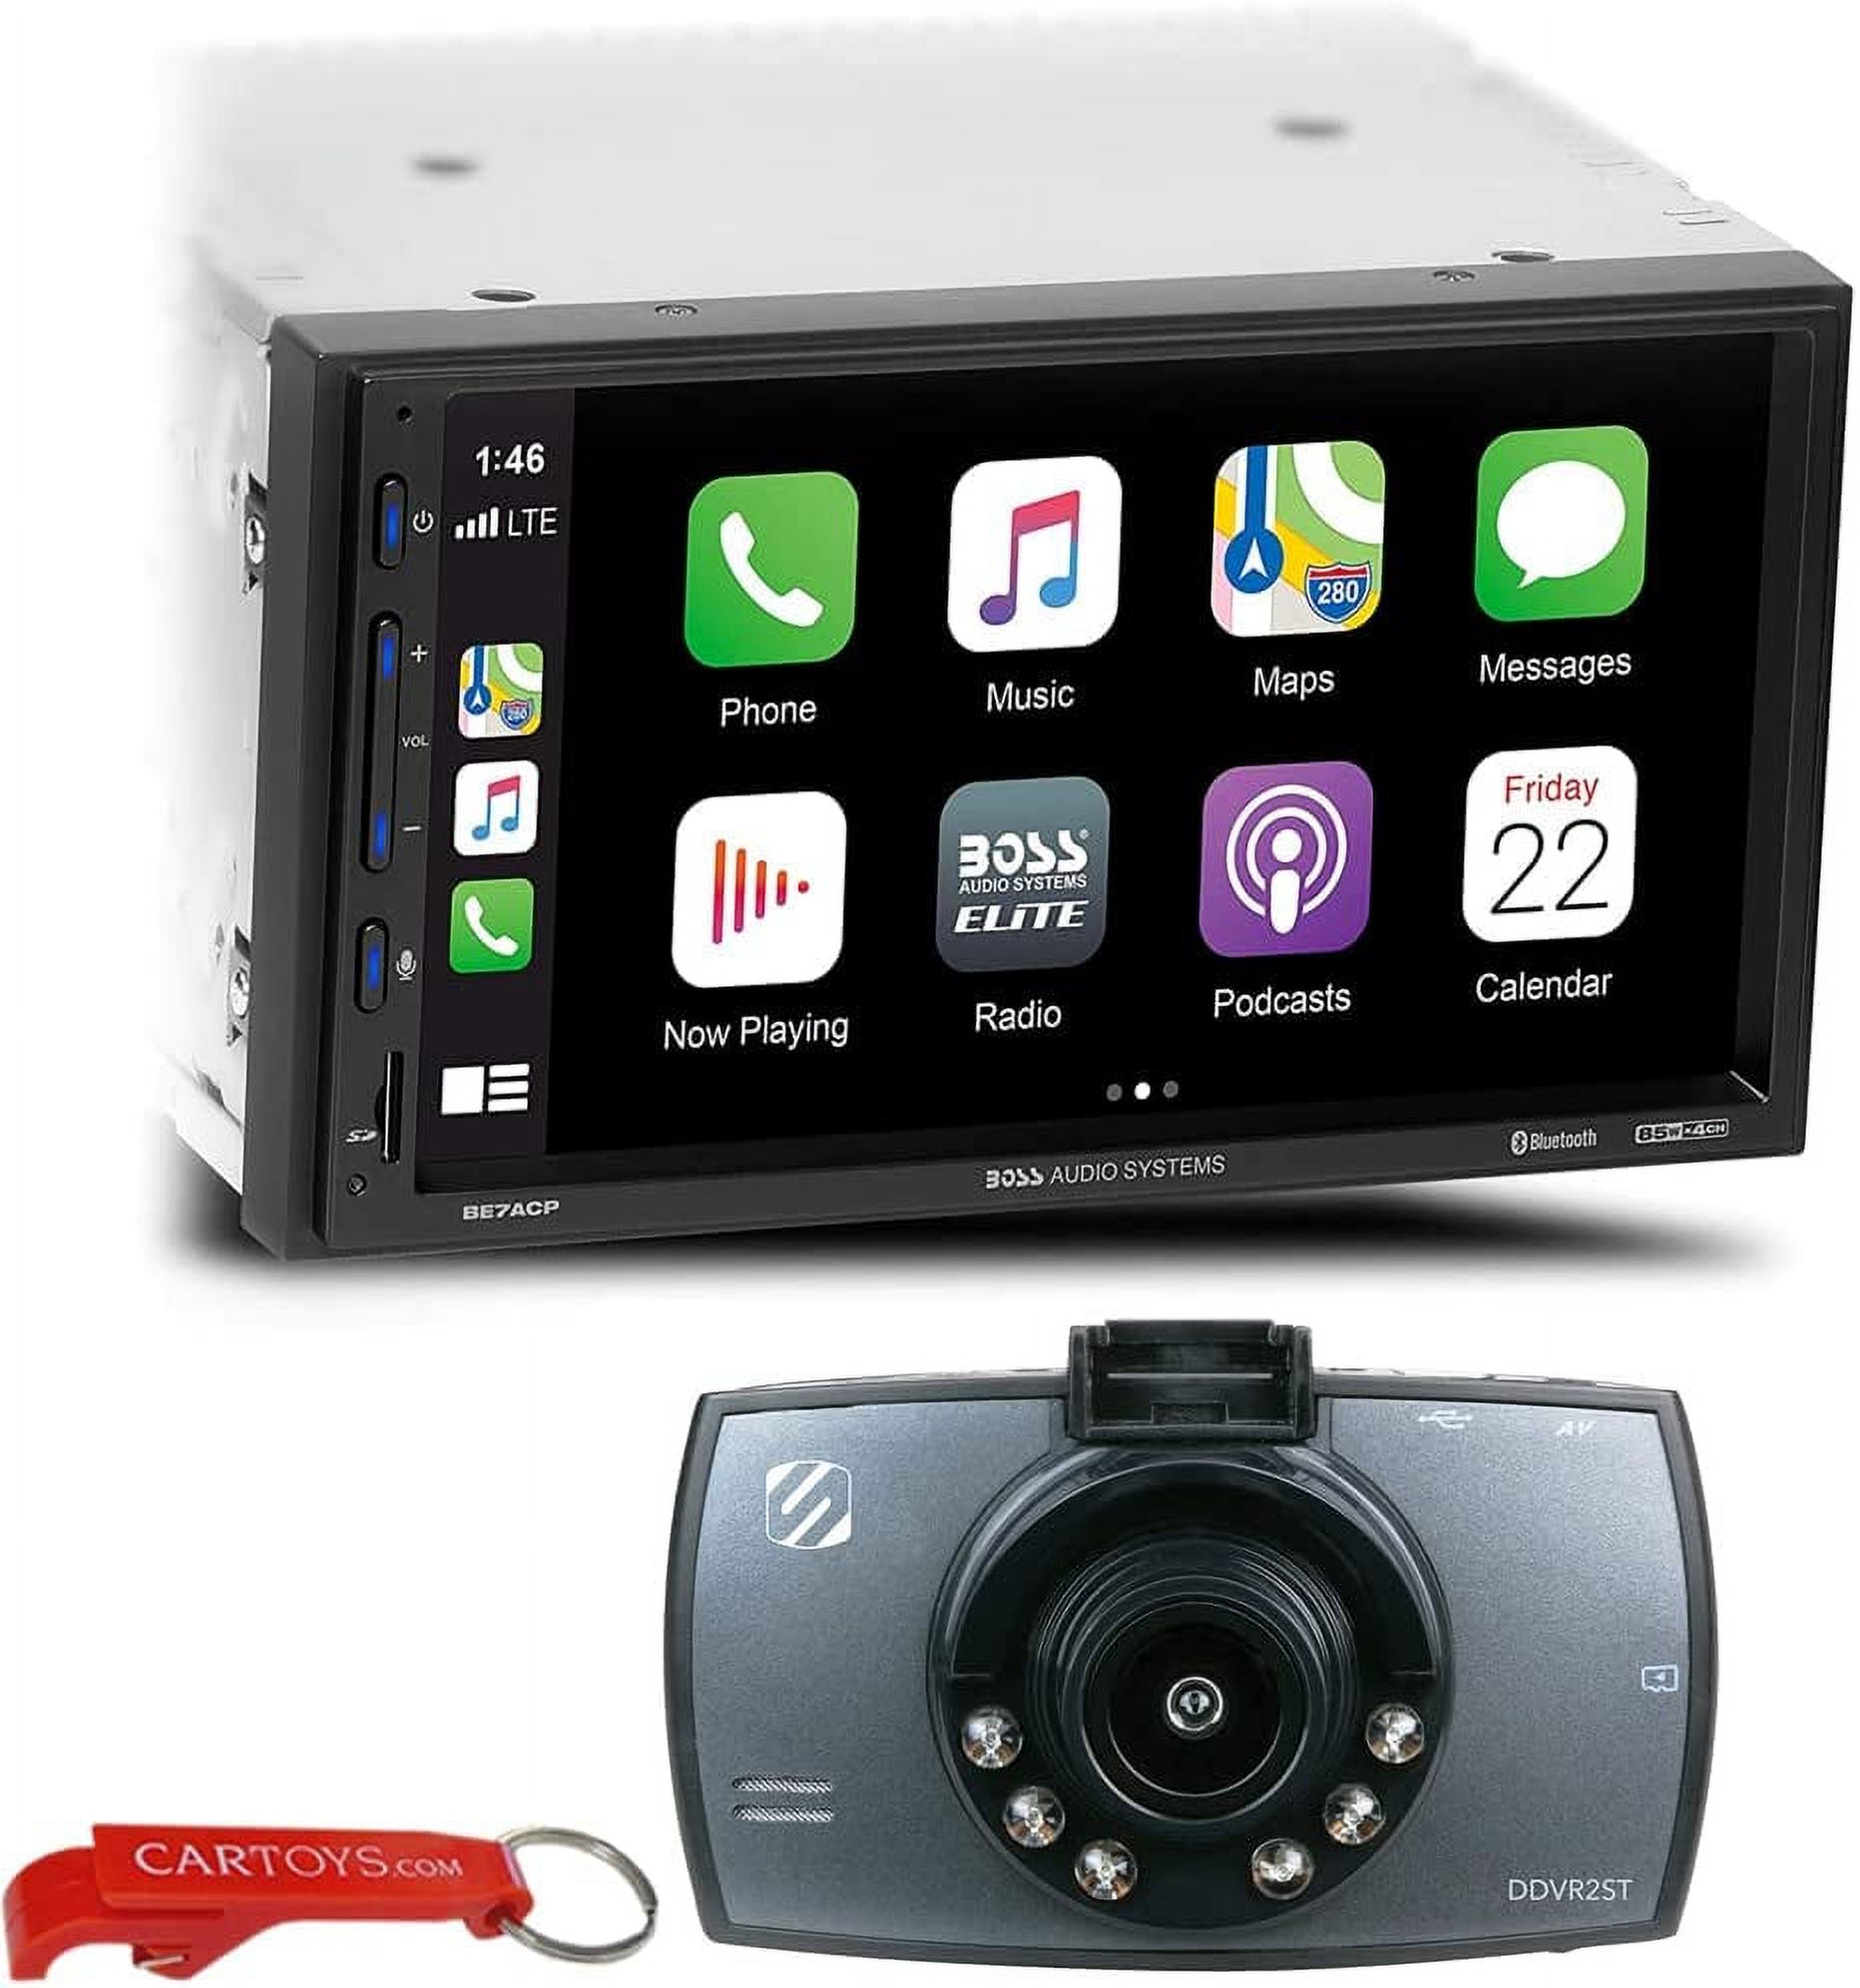 BOSS Audio Systems Elite BE7ACP Car Stereo & 1080p Dash Camera Bundle. Apple CarPlay, Android Auto, 2-DIN Multimedia Receiver w/ 7" Touchscreen, USB, SD, AM/FM Radio Head Unit, No CD/DVD Player - image 1 of 8